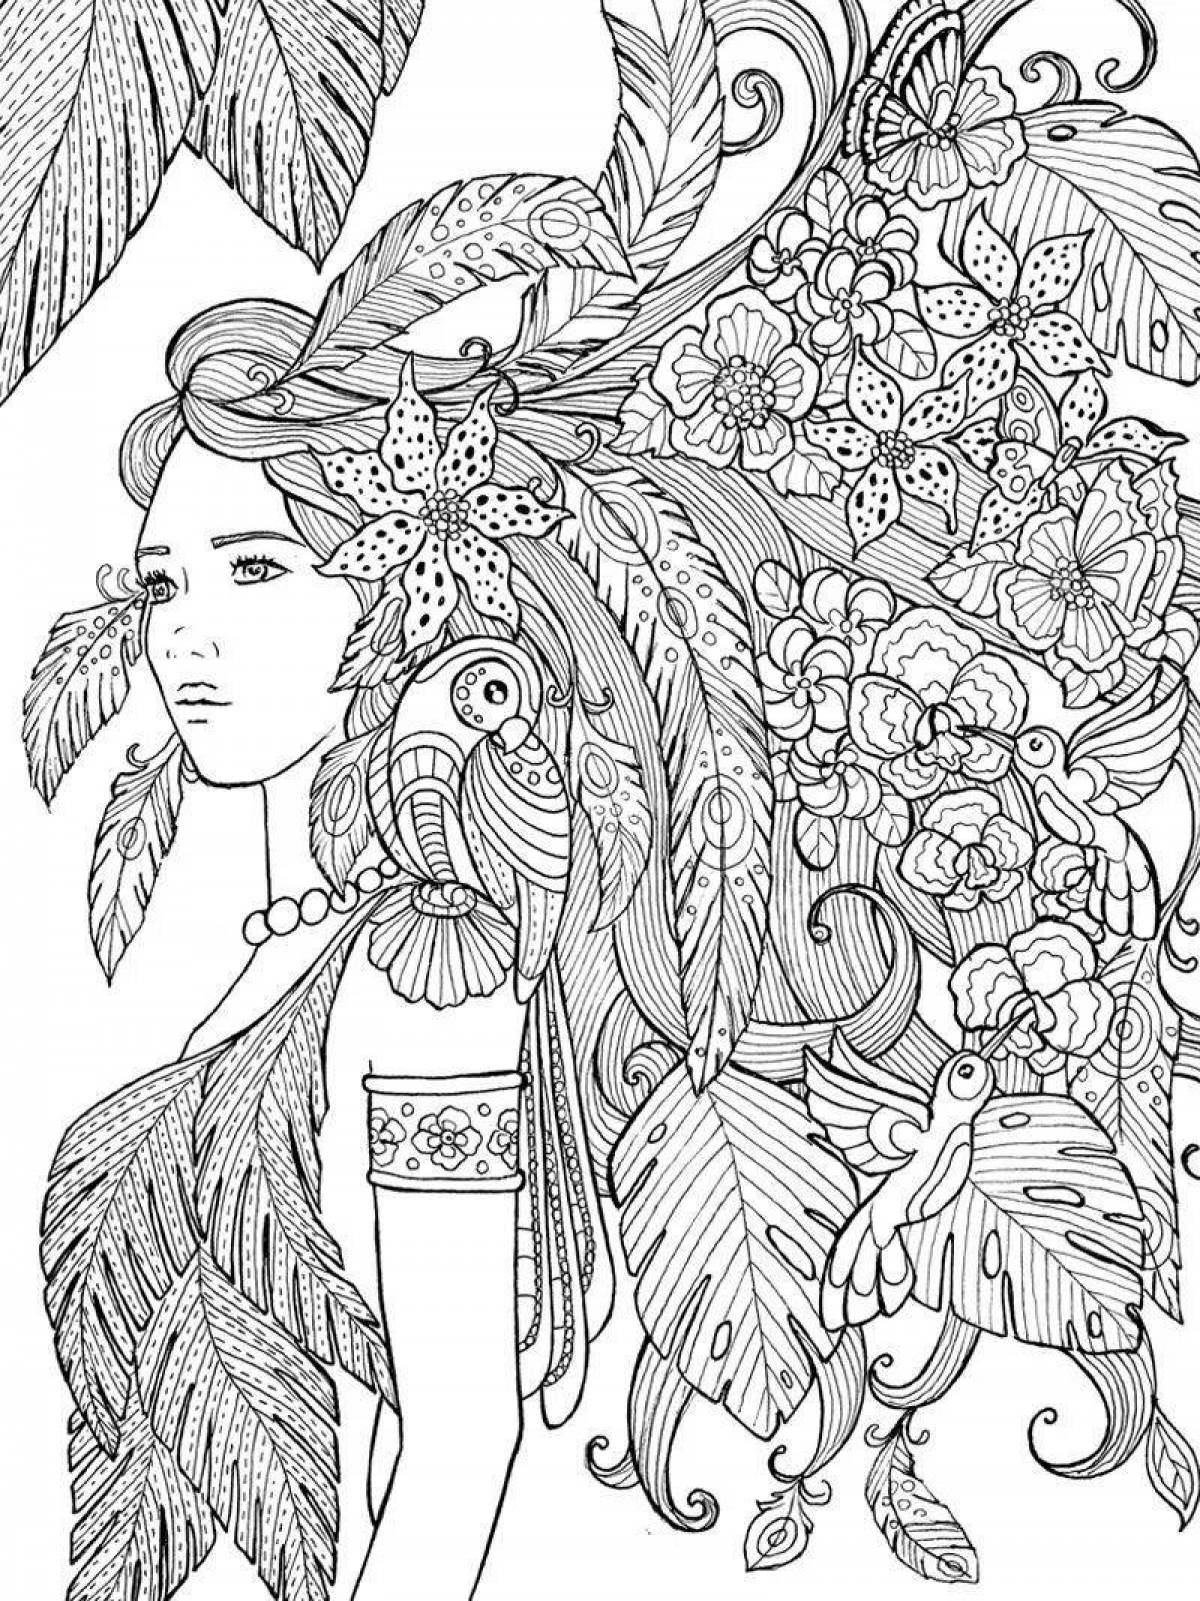 Intriguing coloring book for adults